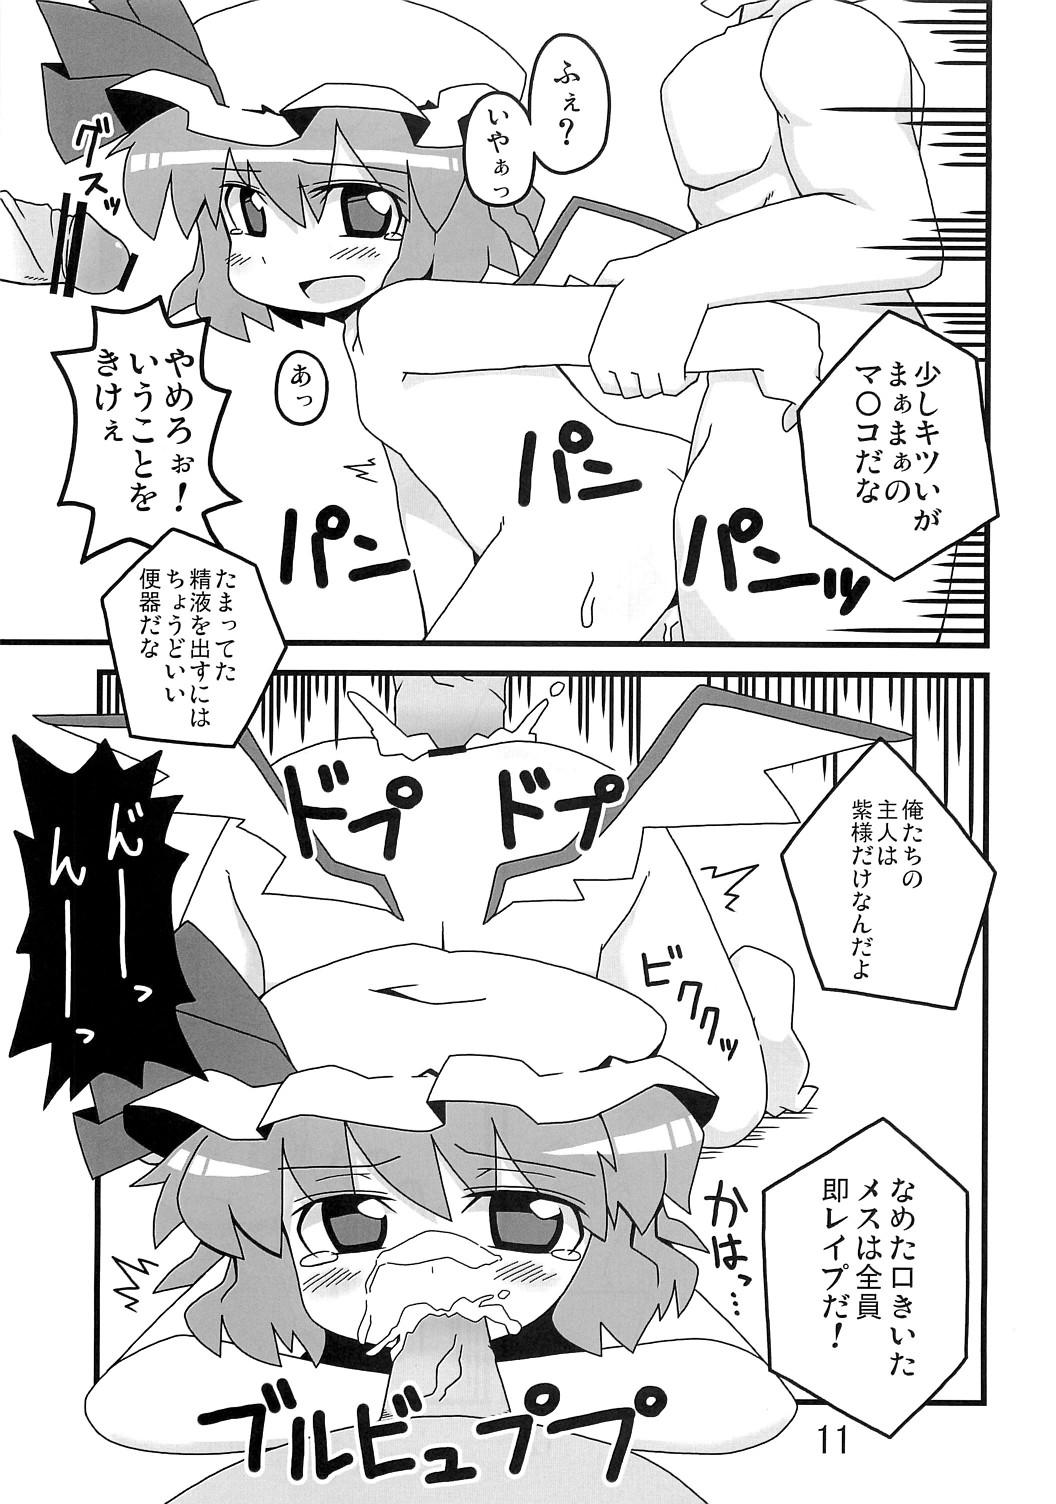 Boy Fuck Girl 東方豊年祭 - Touhou project Spank - Page 10